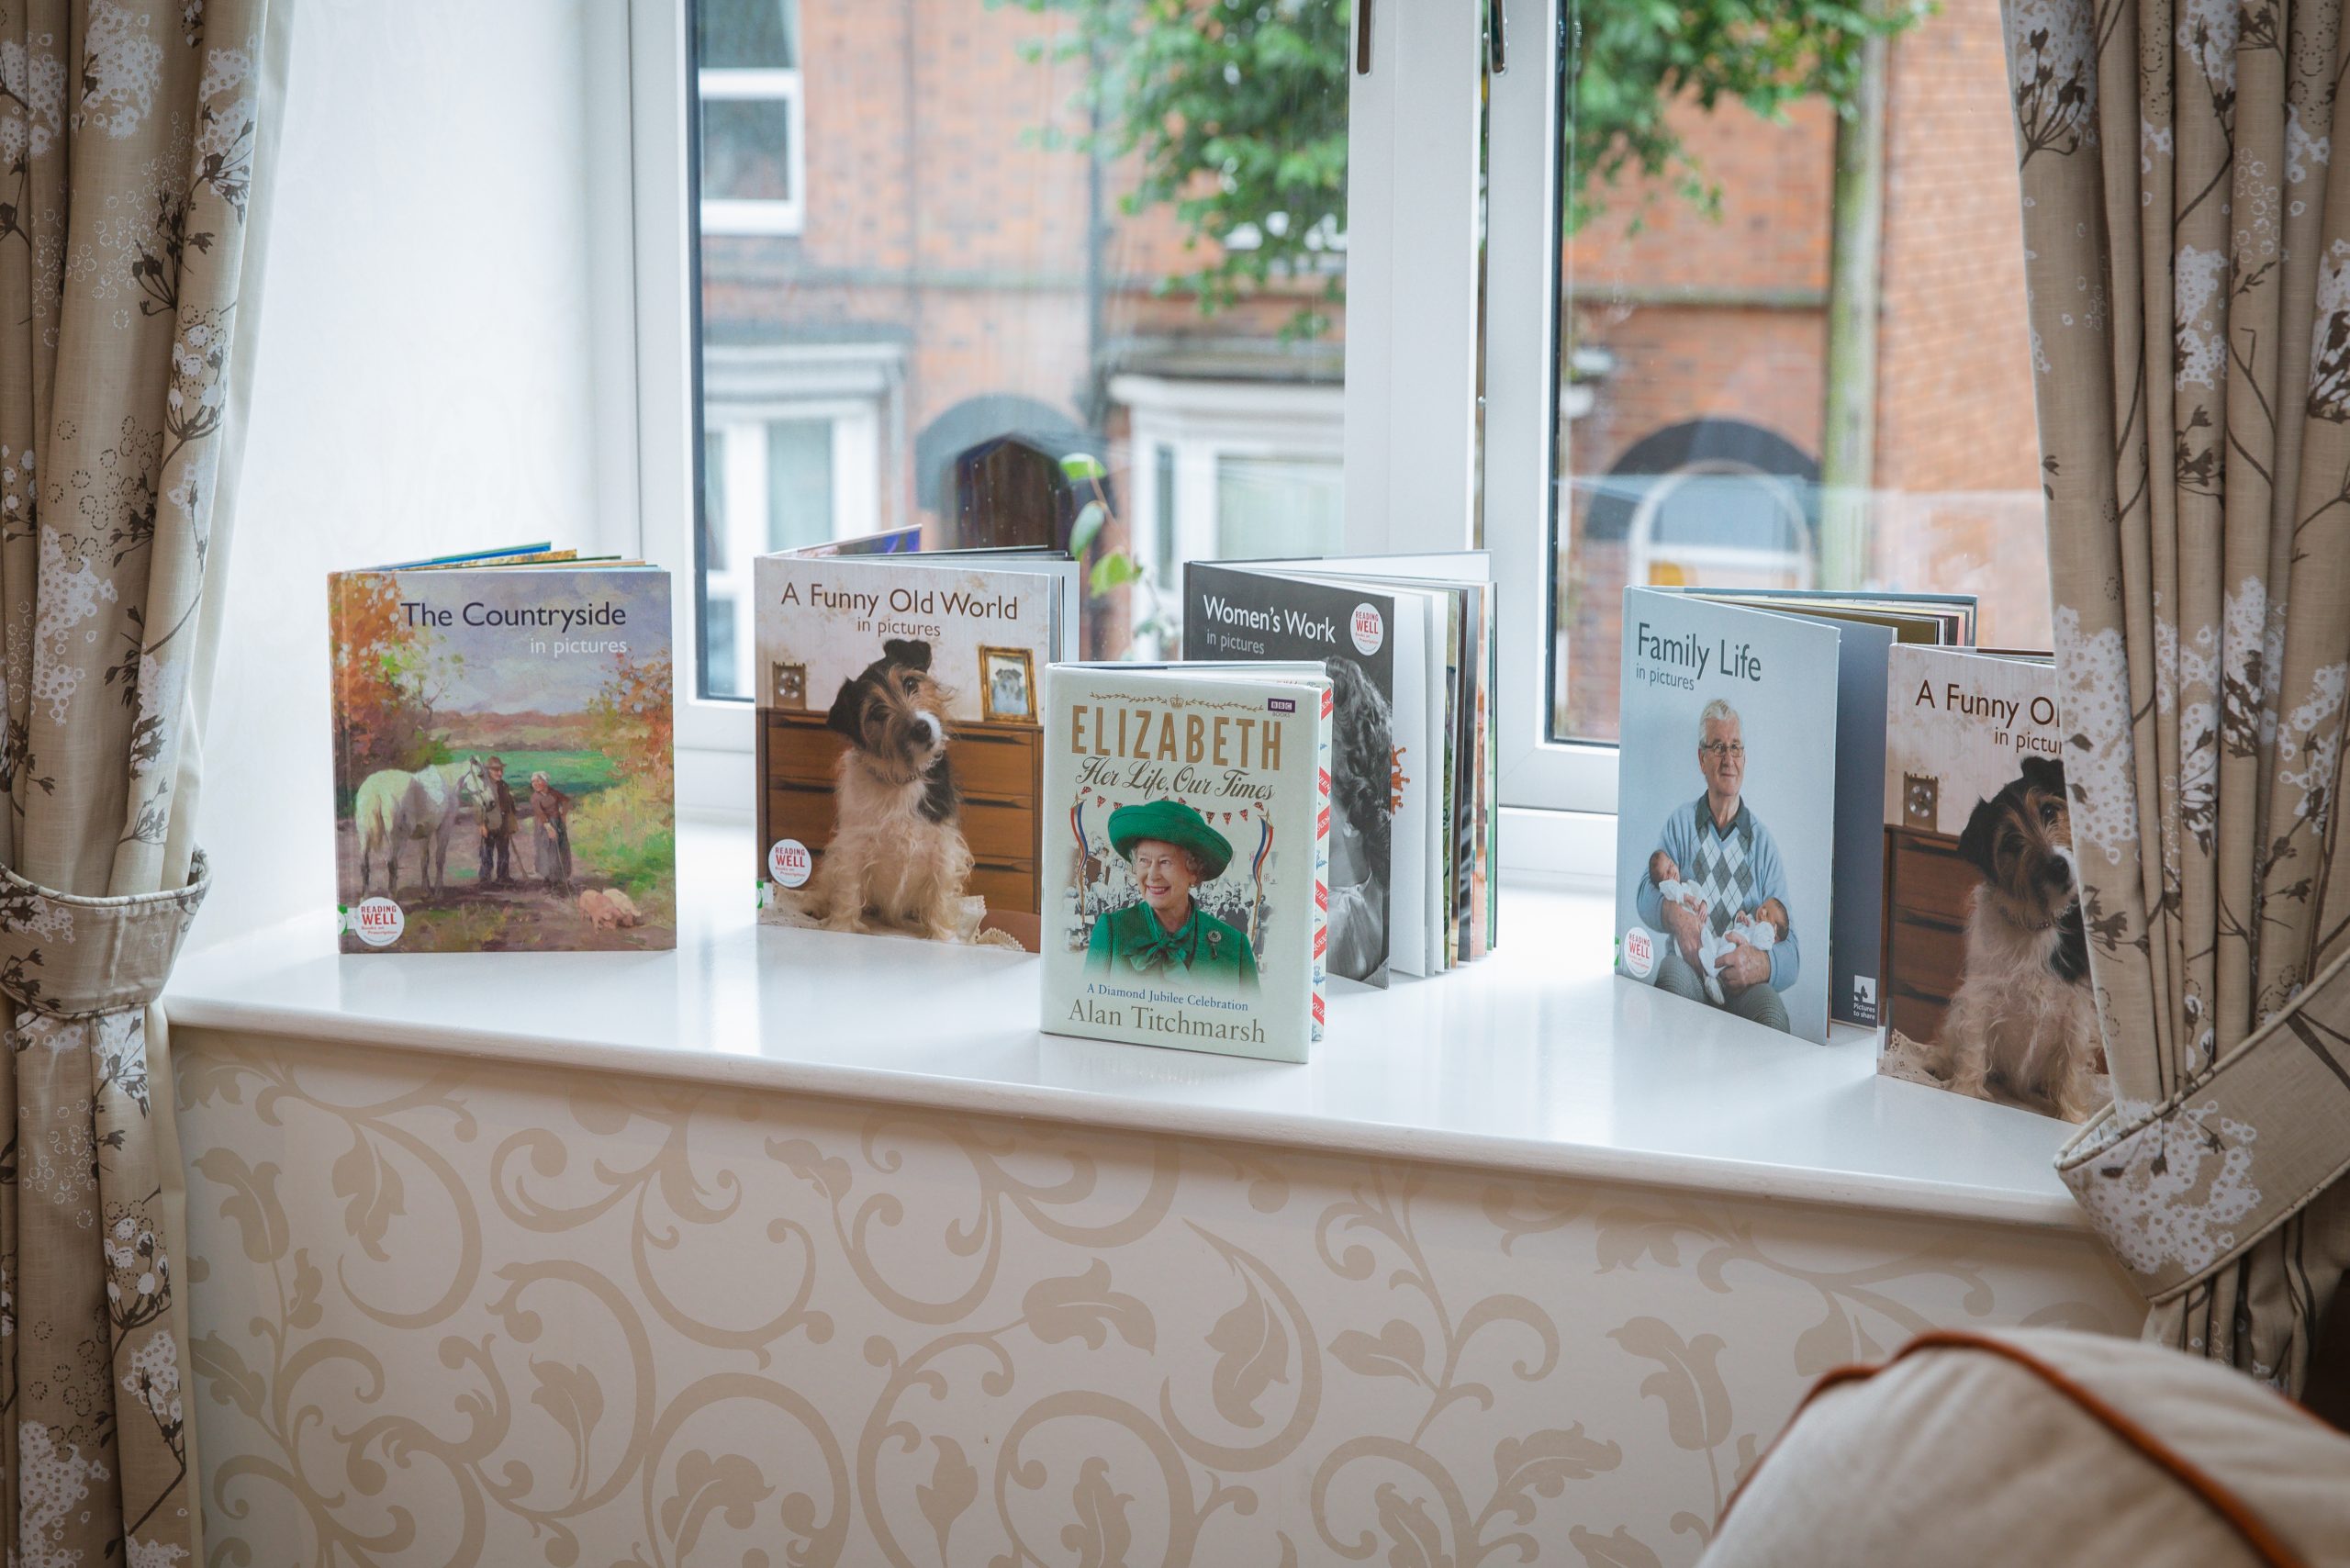 A selection of books for residents to read on the windowsill